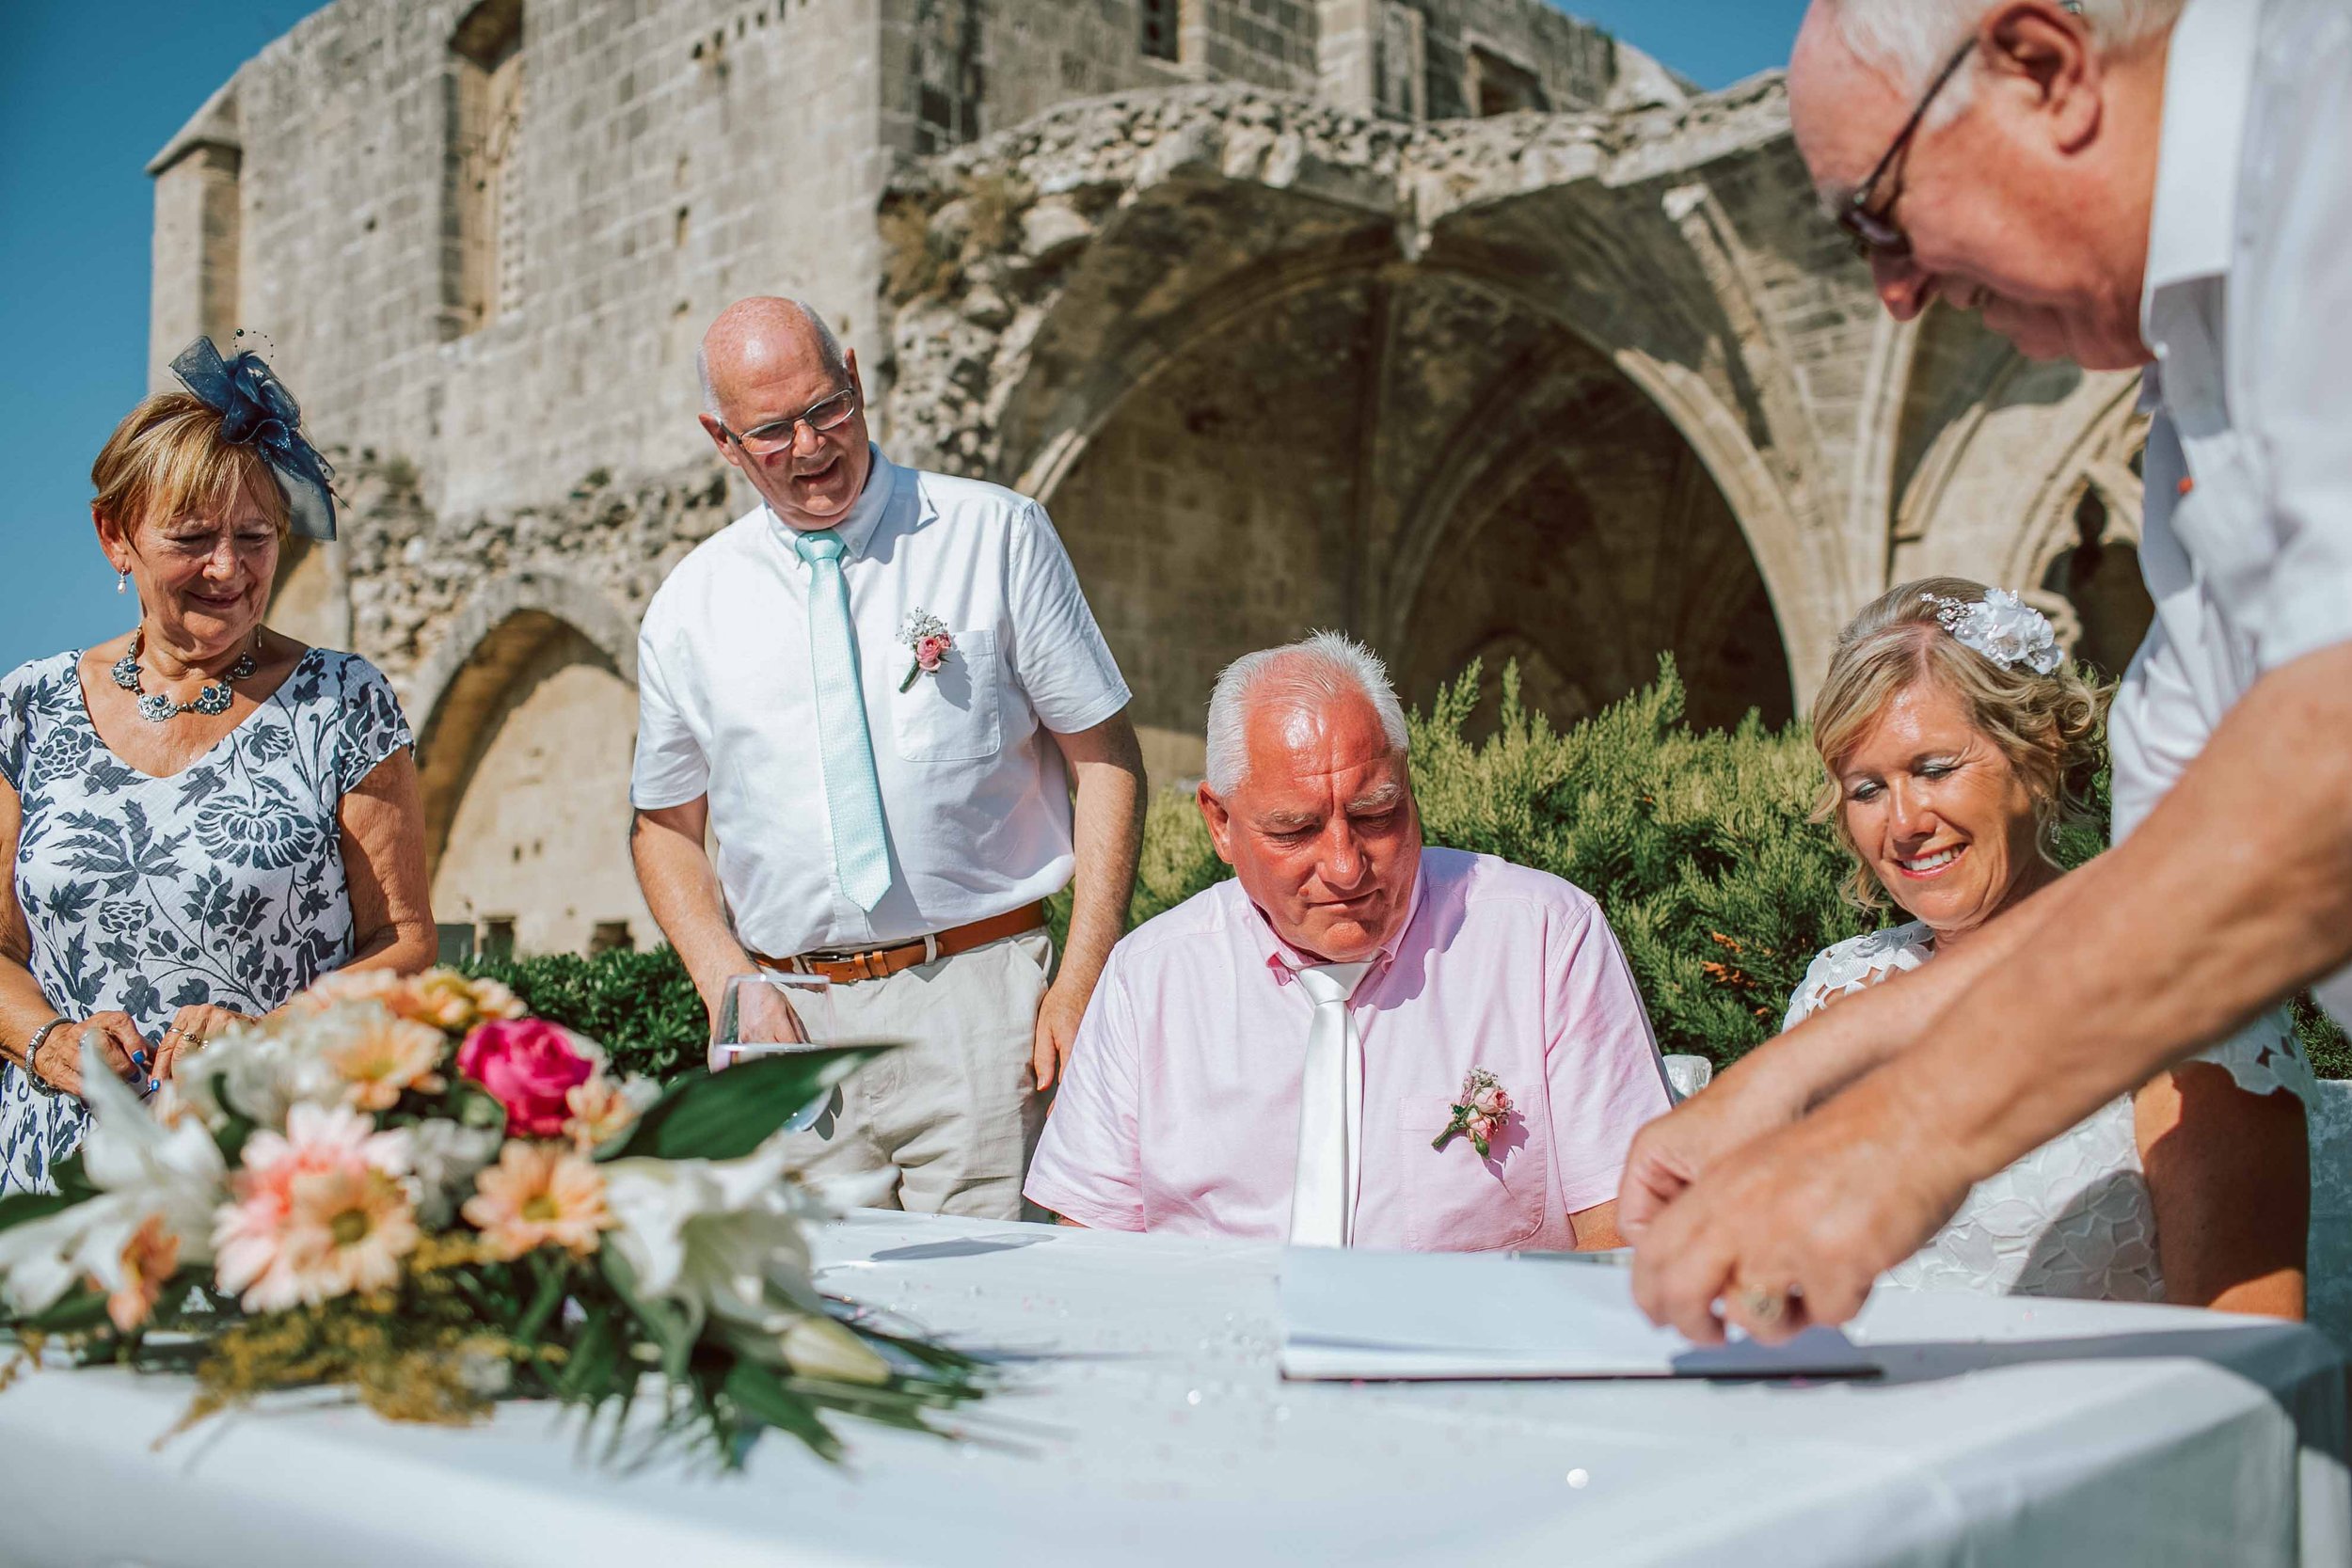 Getting married at Bellapais Abbey, Cyprus